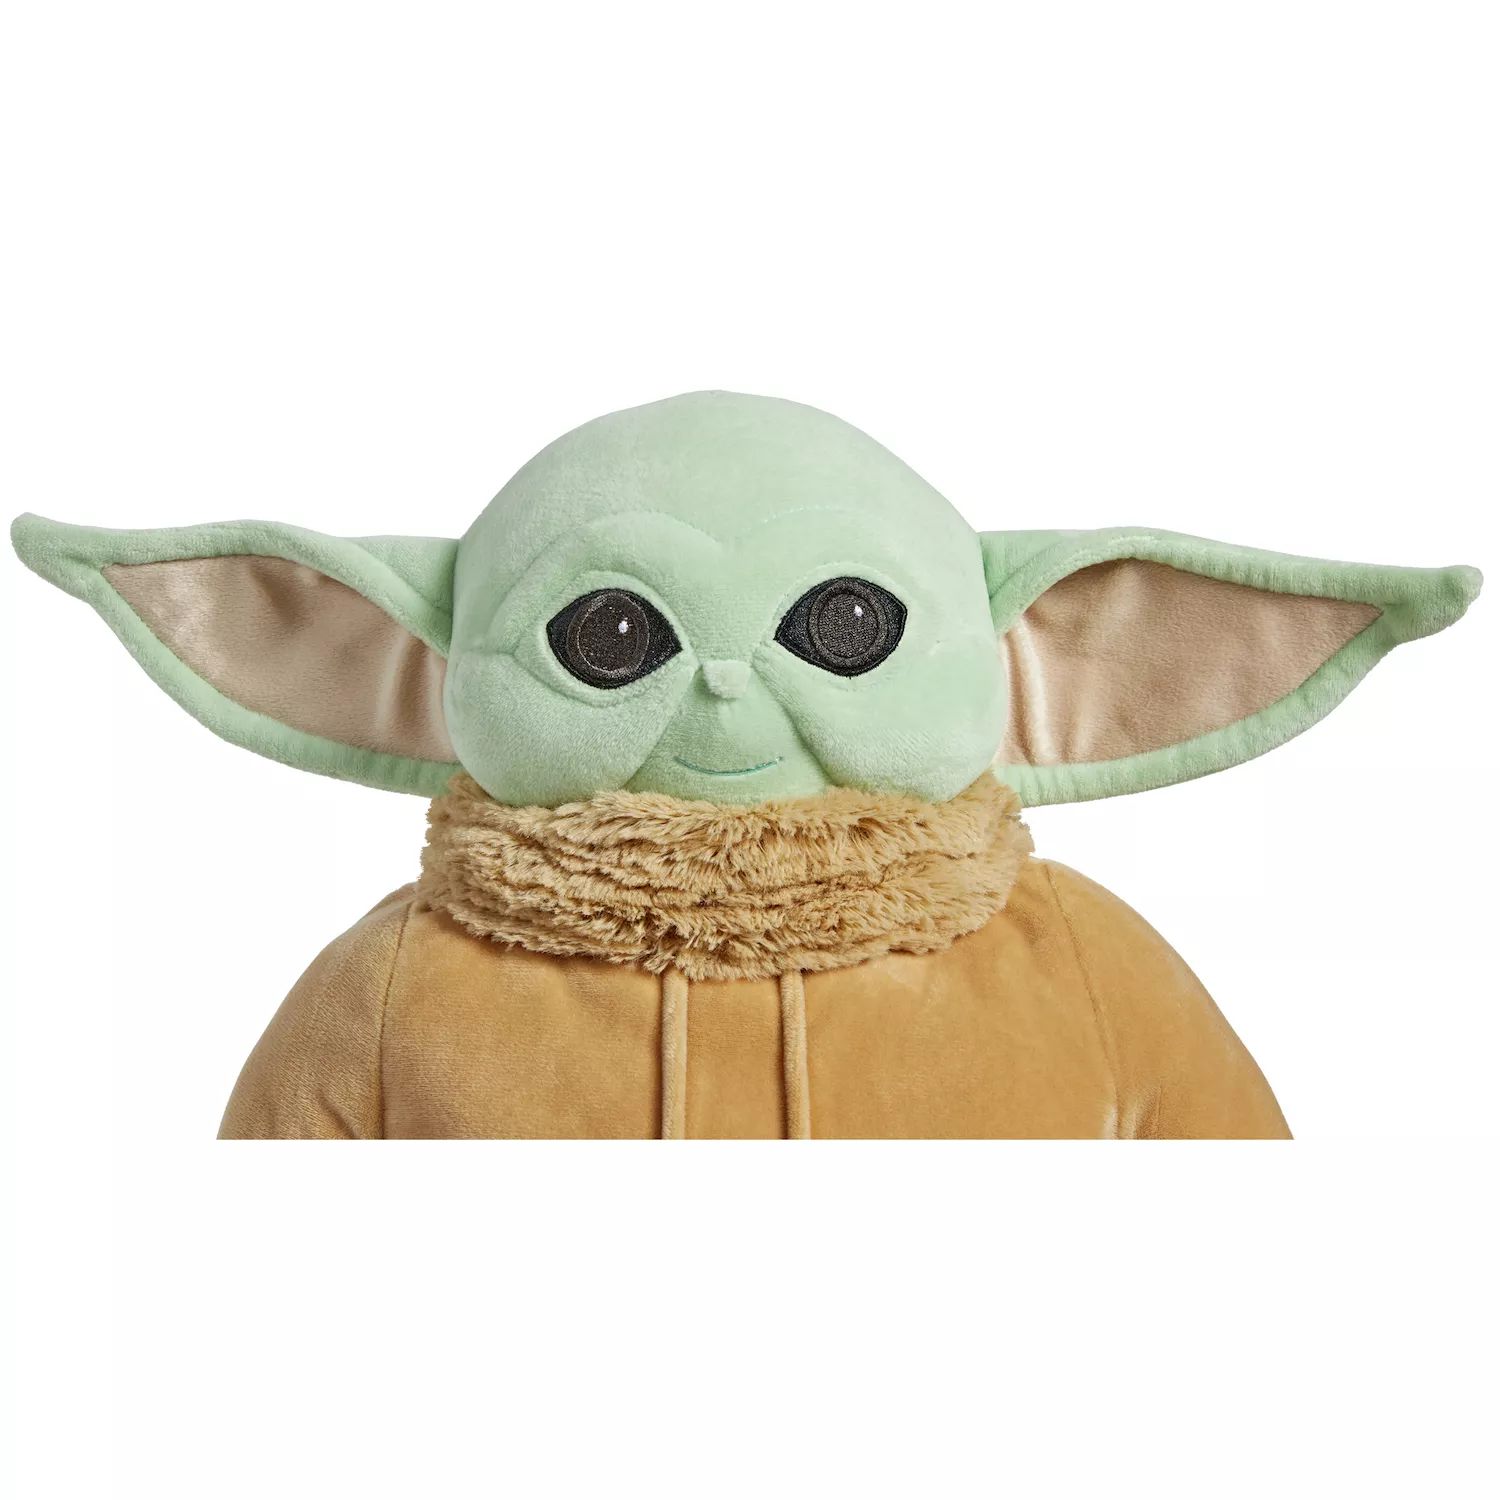 Disney Star Wars The Mandalorian Baby Yoda The Child Плюшевая игрушка от Pillow Pets Pillow Pets down pillow 95 white goose down feather household goose down pillow single size five star hotel pillow core to help sleep pillow